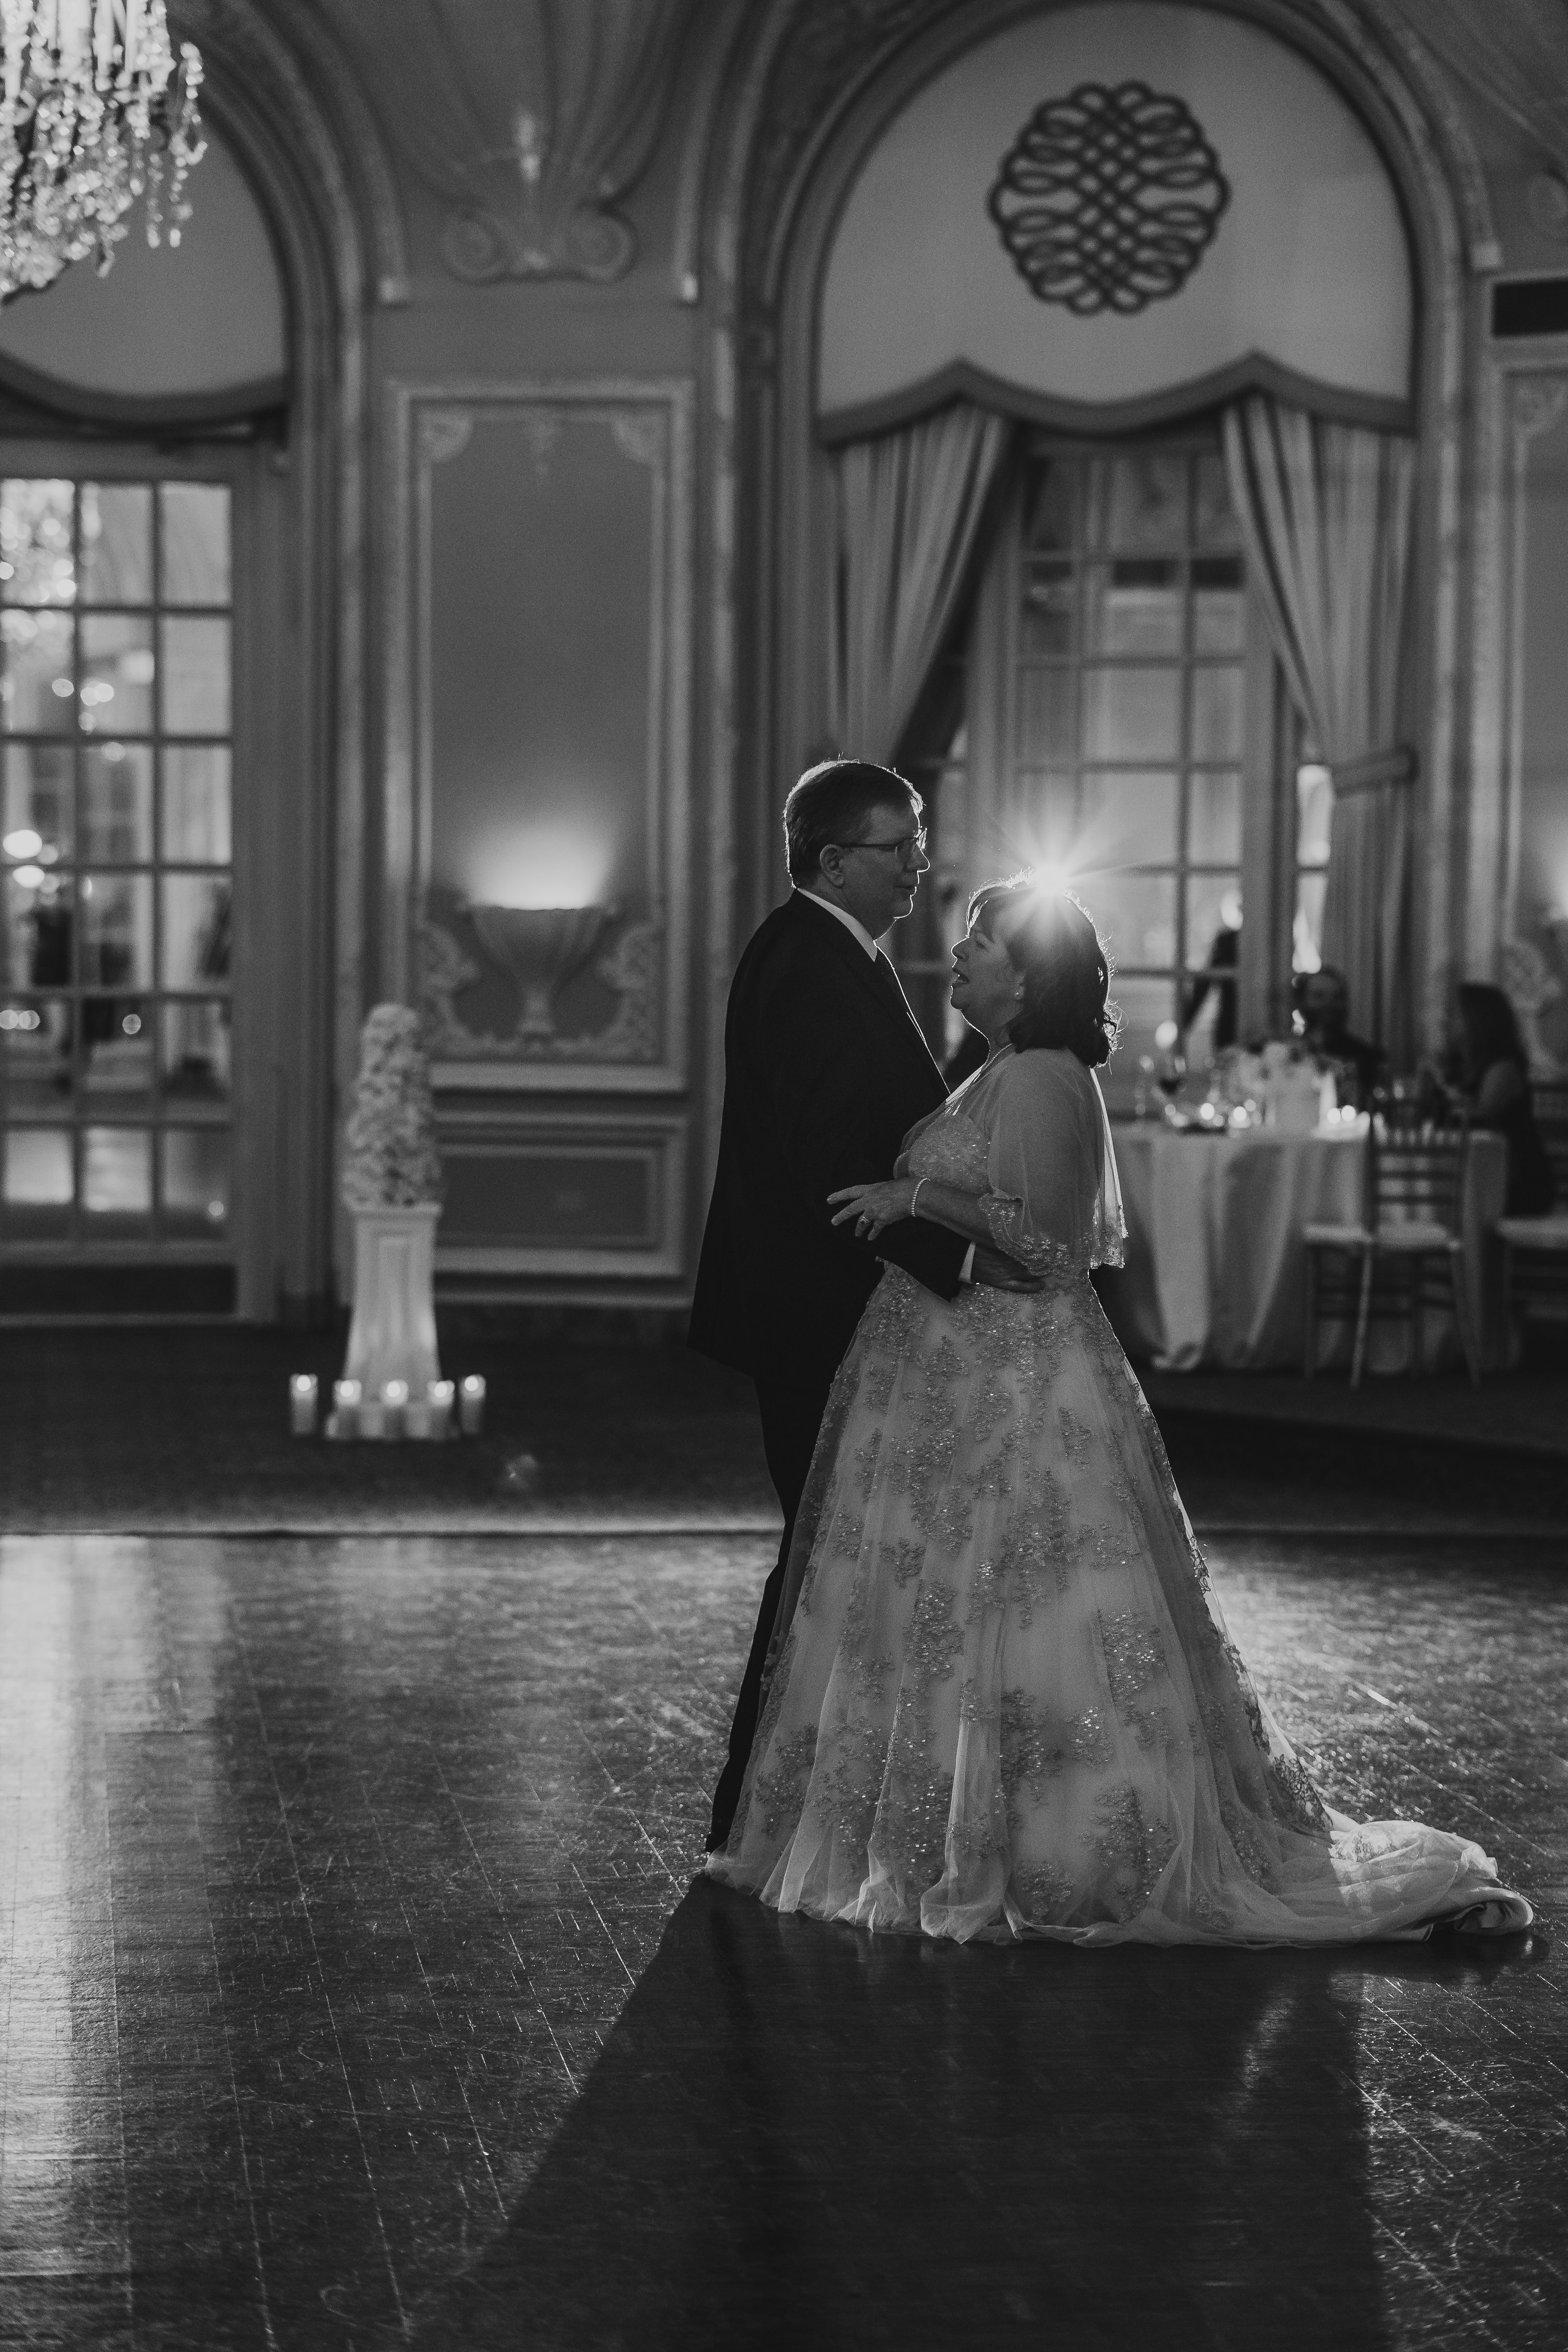 New England  Wedding Photographer,fairmont copley plaza,first dance,black and white first dance